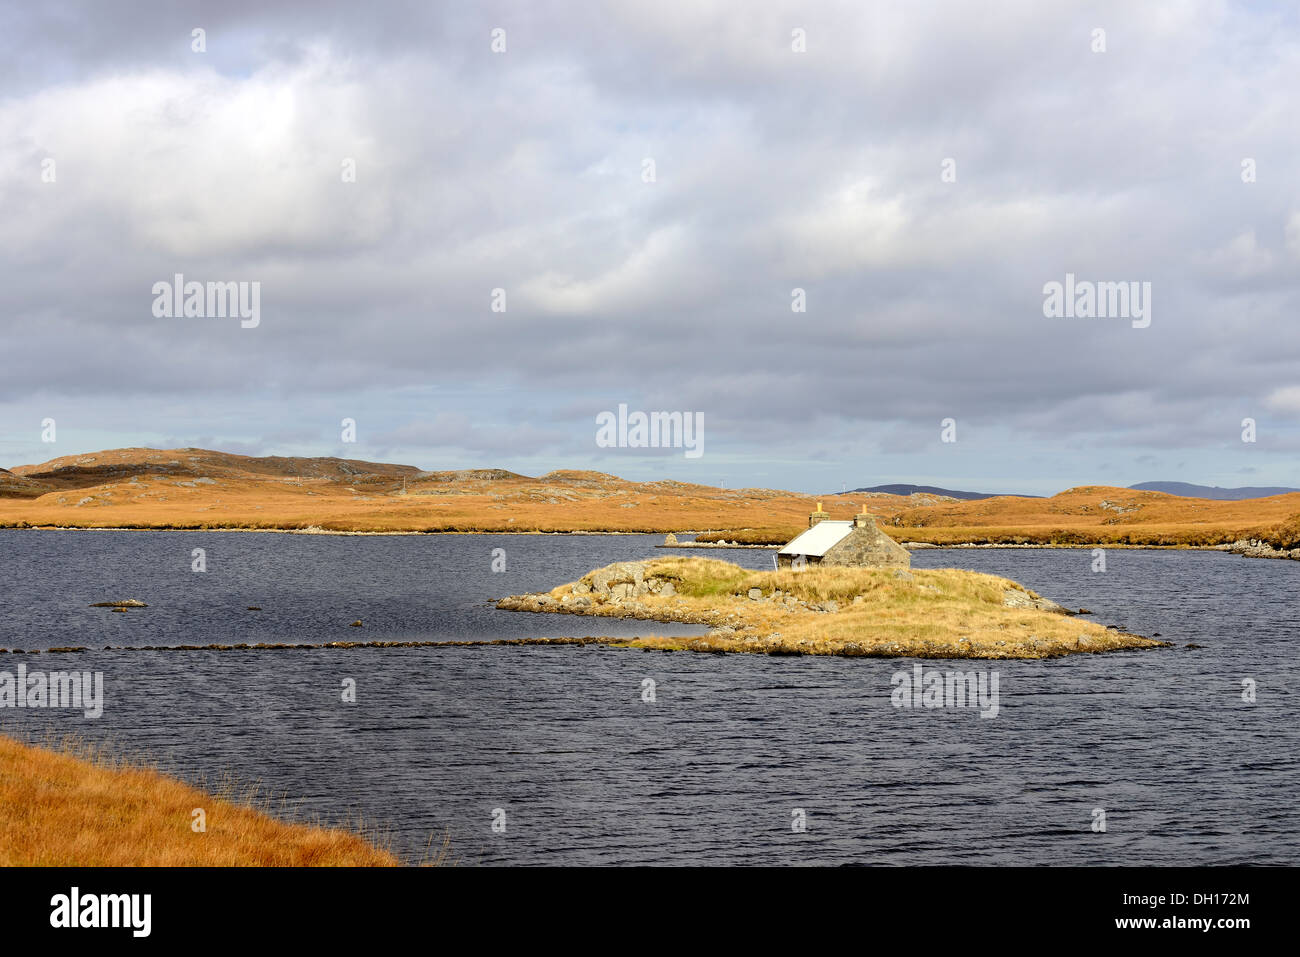 Bothy or Shieling on a small island in Loch Faoghail an Tuim Stock Photo